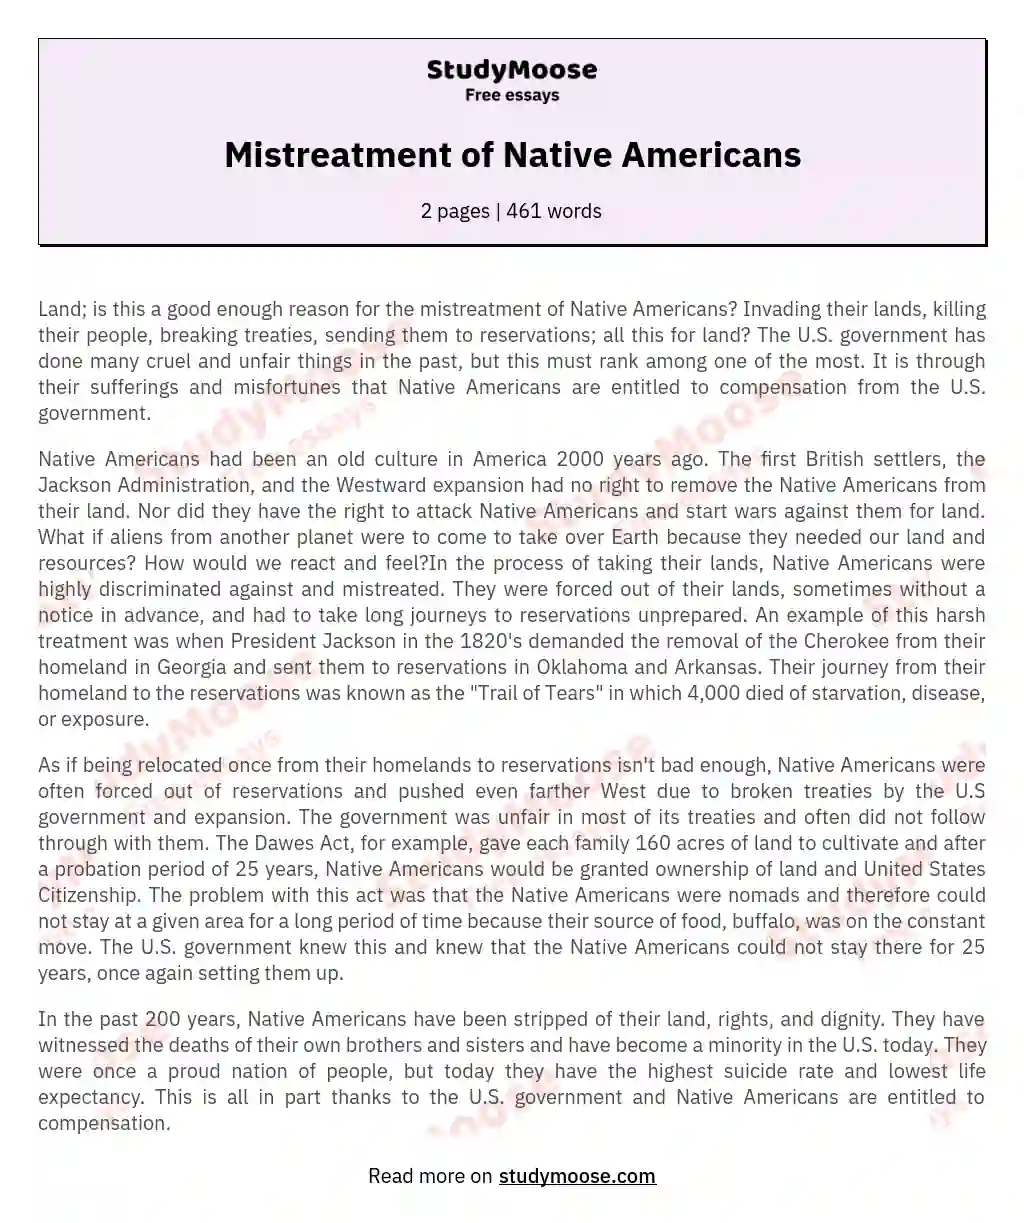 Mistreatment of Native Americans